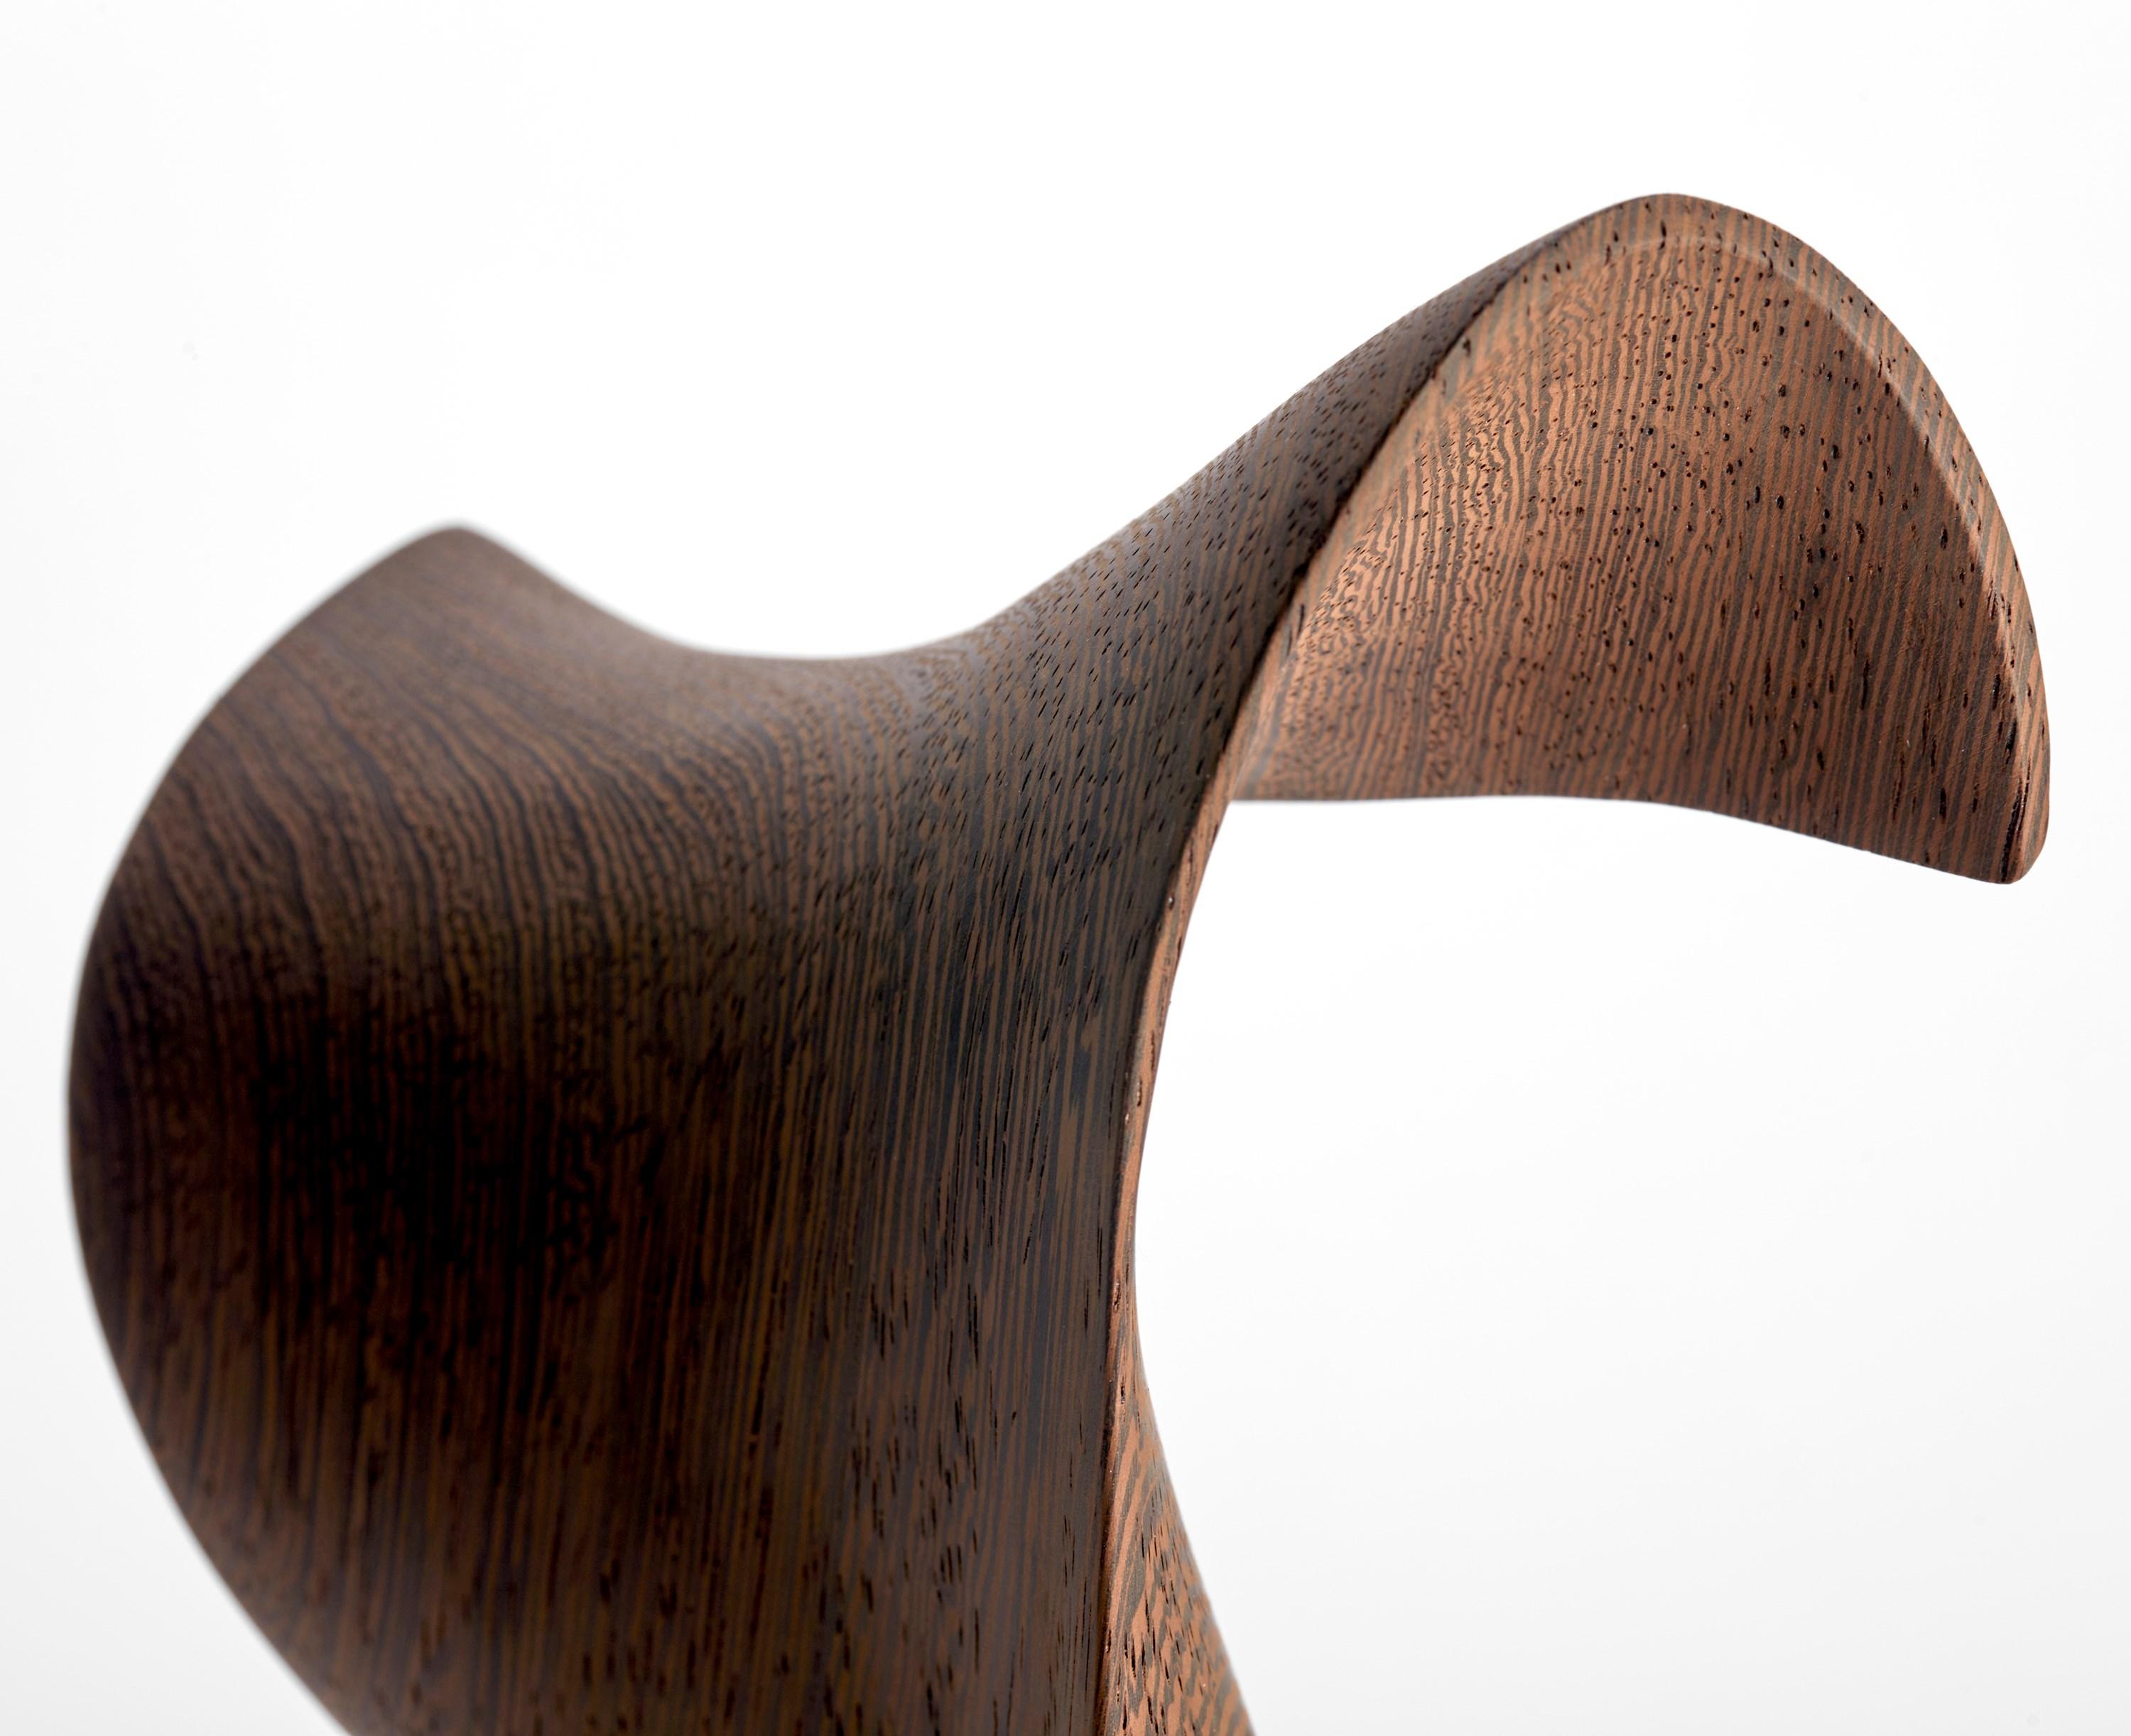 Stainless Steel Flow Petit No 22, fluid abstract wooden sculpture by the Danish Studio Egeværk For Sale